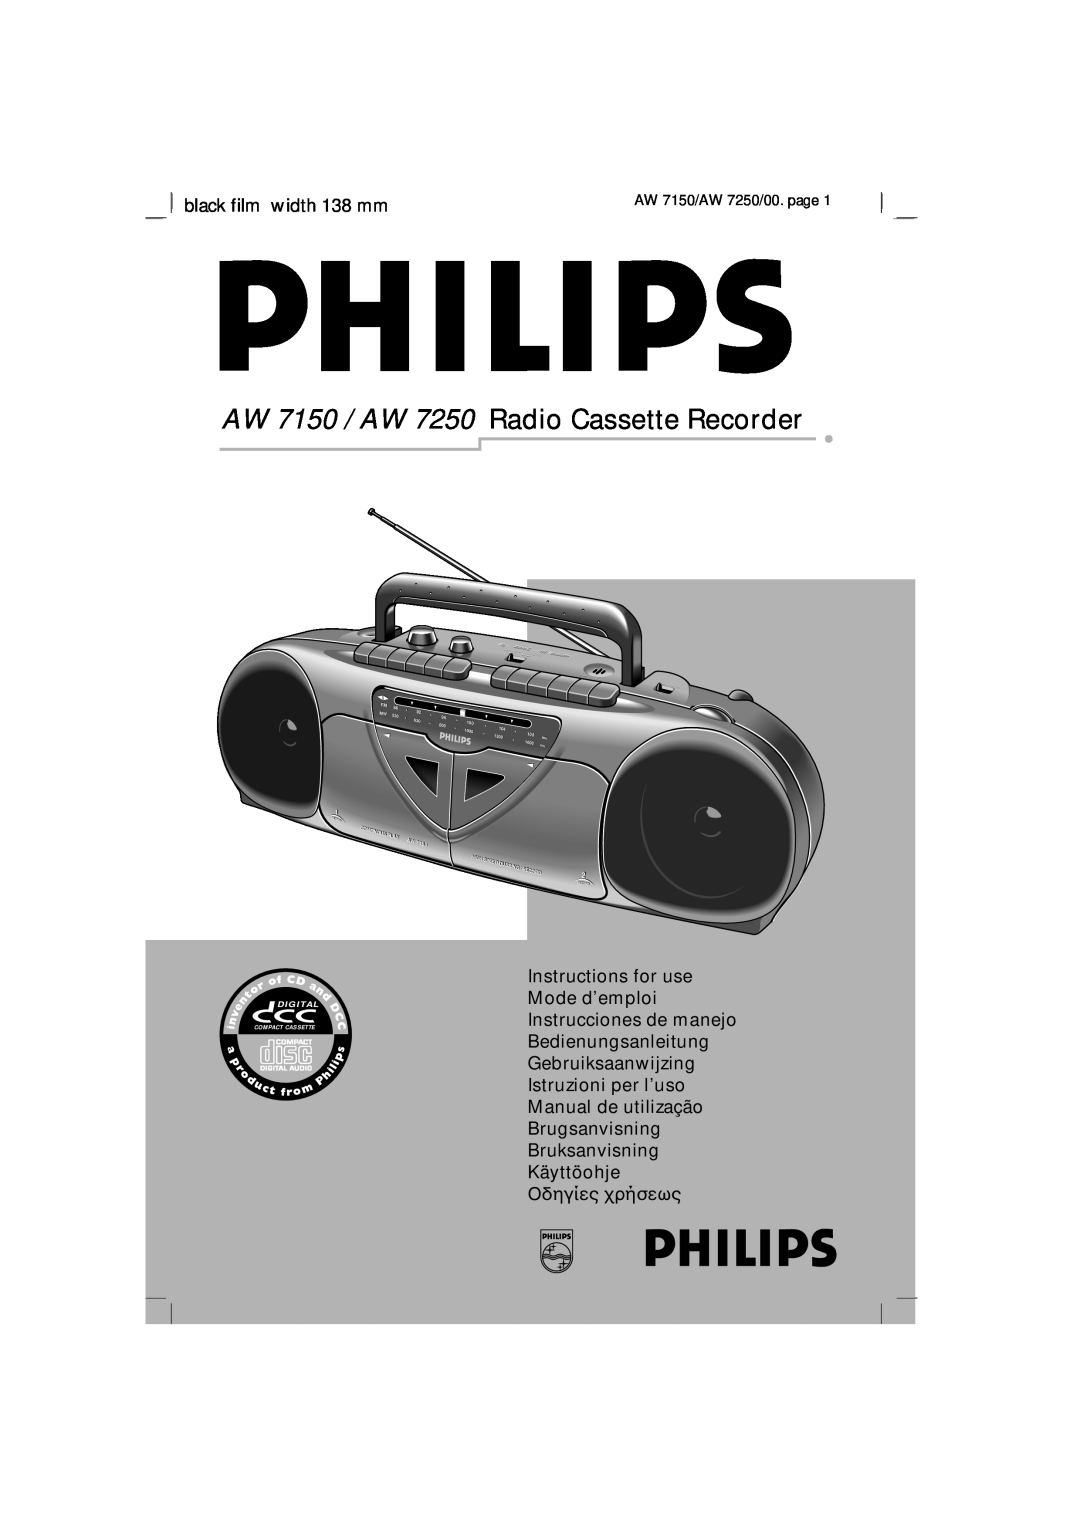 Philips AW 7250/04S, AW 7150/04S manual AW 7150 / AW 7250 Radio Cassette Recorder 